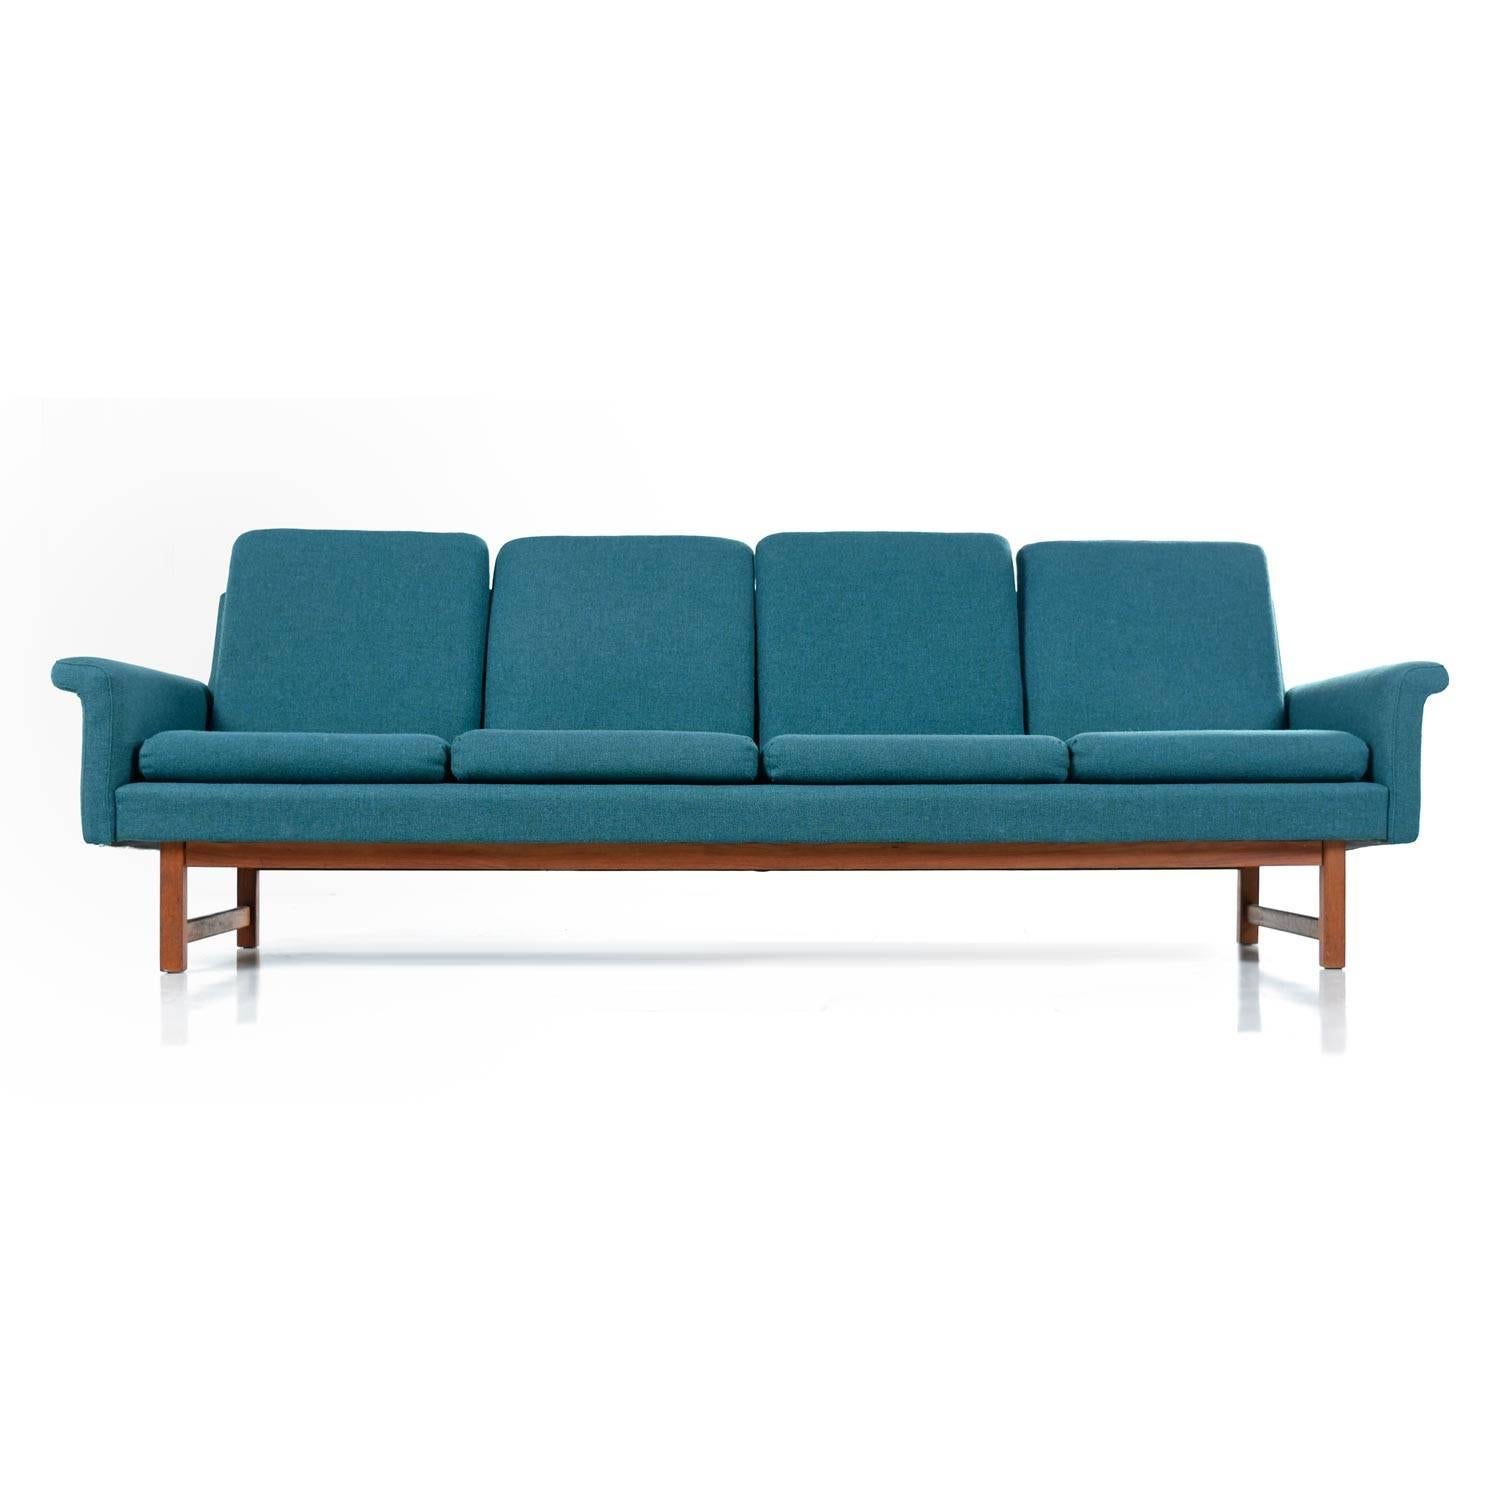 This sleek midcentury four-seat sofa, in the style of Folke Ohlsson celebrates beautiful Danish design. Exceptional, all original condition. The blue fabric is as stylish and fashionable now as it was in the 1960s. Segmented, separate back and head